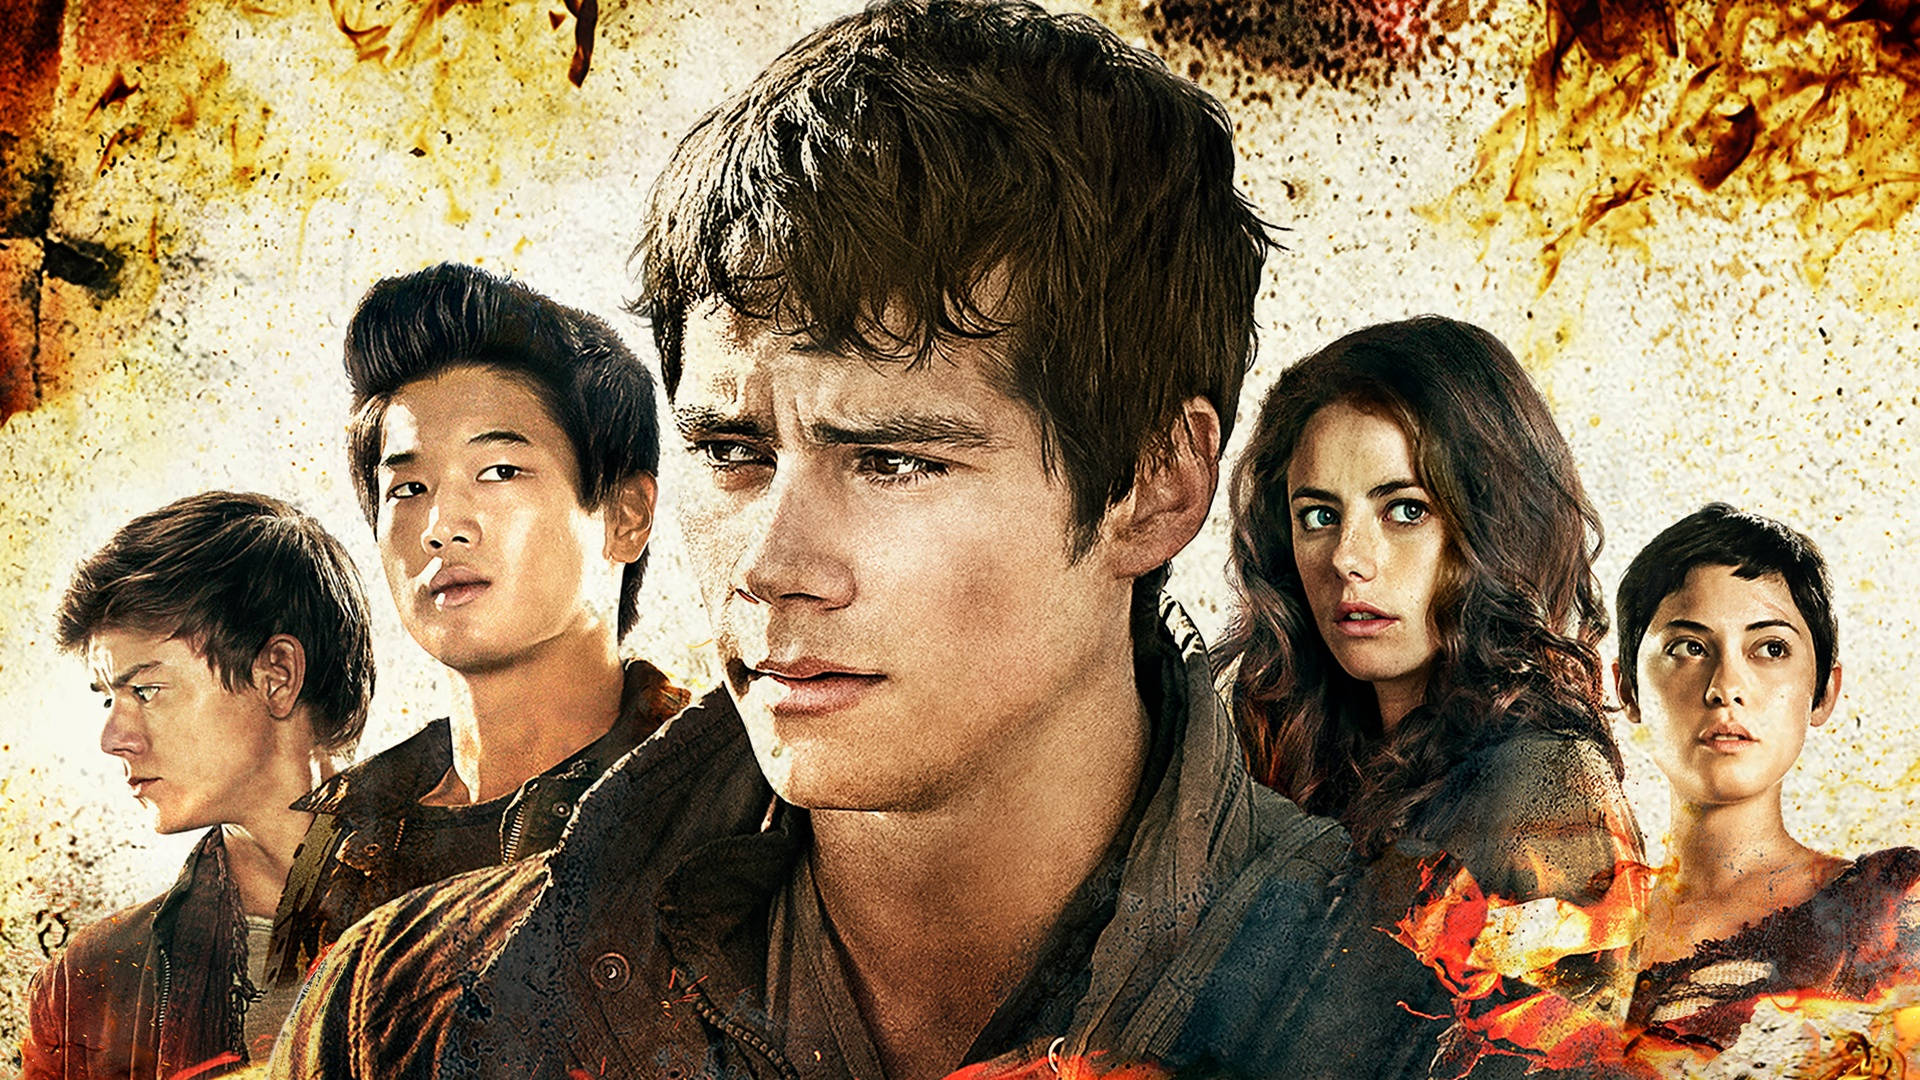 Maze Runner Scorch Characters Collage Wallpaper